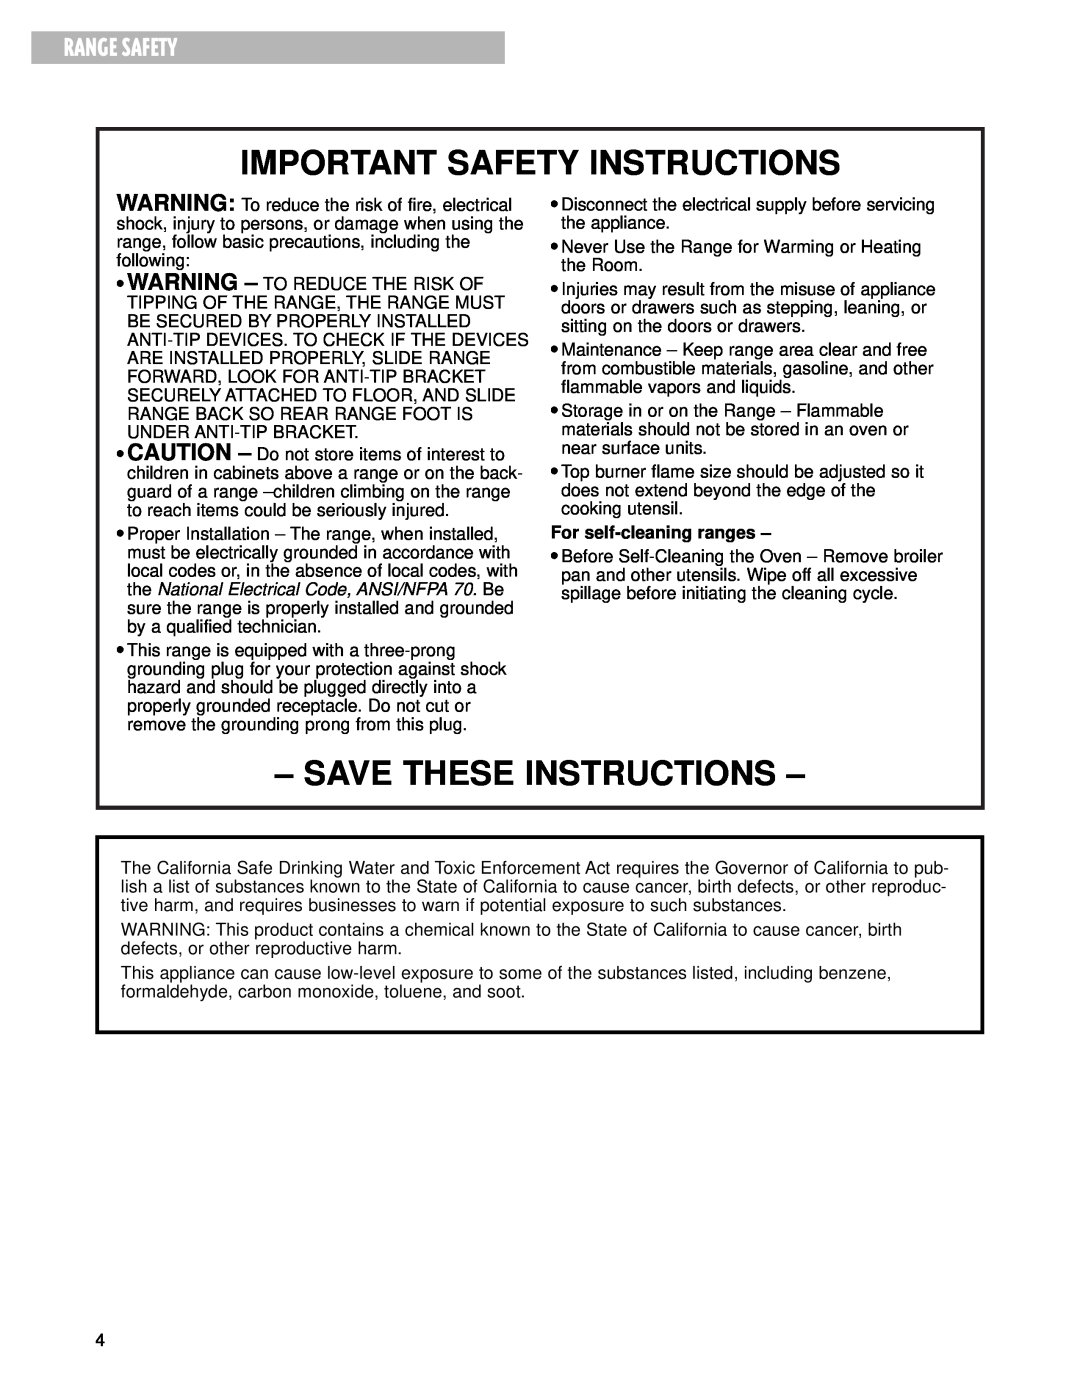 Whirlpool F195LEH warranty Range Safety, Important Safety Instructions, Save These Instructions, For self-cleaning ranges 